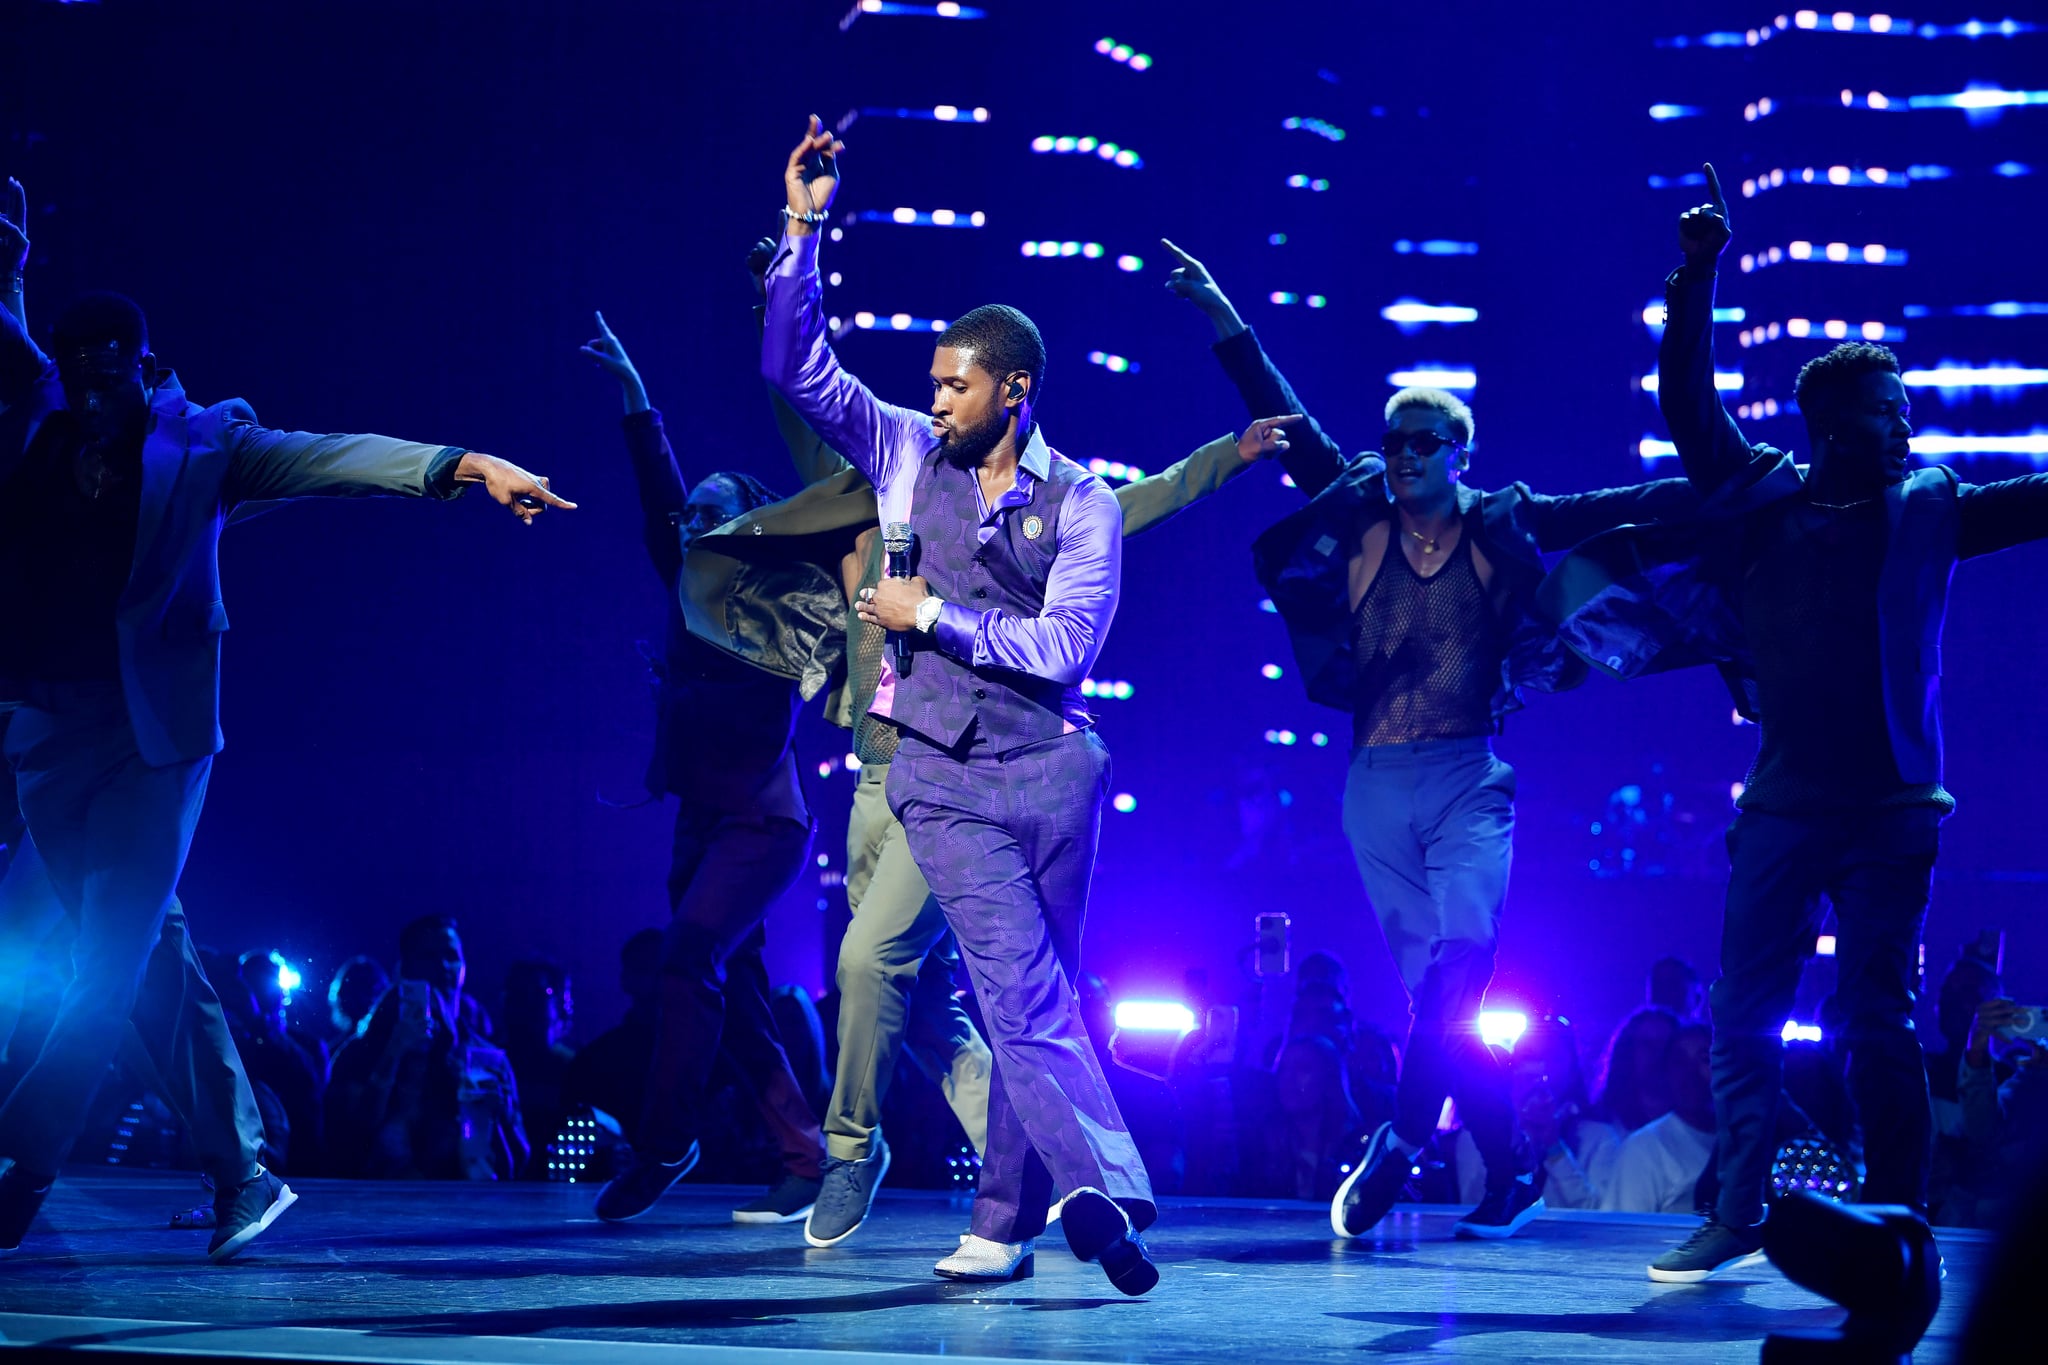 LAS VEGAS, NEVADA - JULY 15: Usher Performs at the grand opening of Usher: My Way - The Vegas Residency at Dolby Live at Park MGM on July 15, 2022 in Las Vegas, Nevada. (Photo by Denise Truscello/Getty Images for Dolby Live at Park MGM)